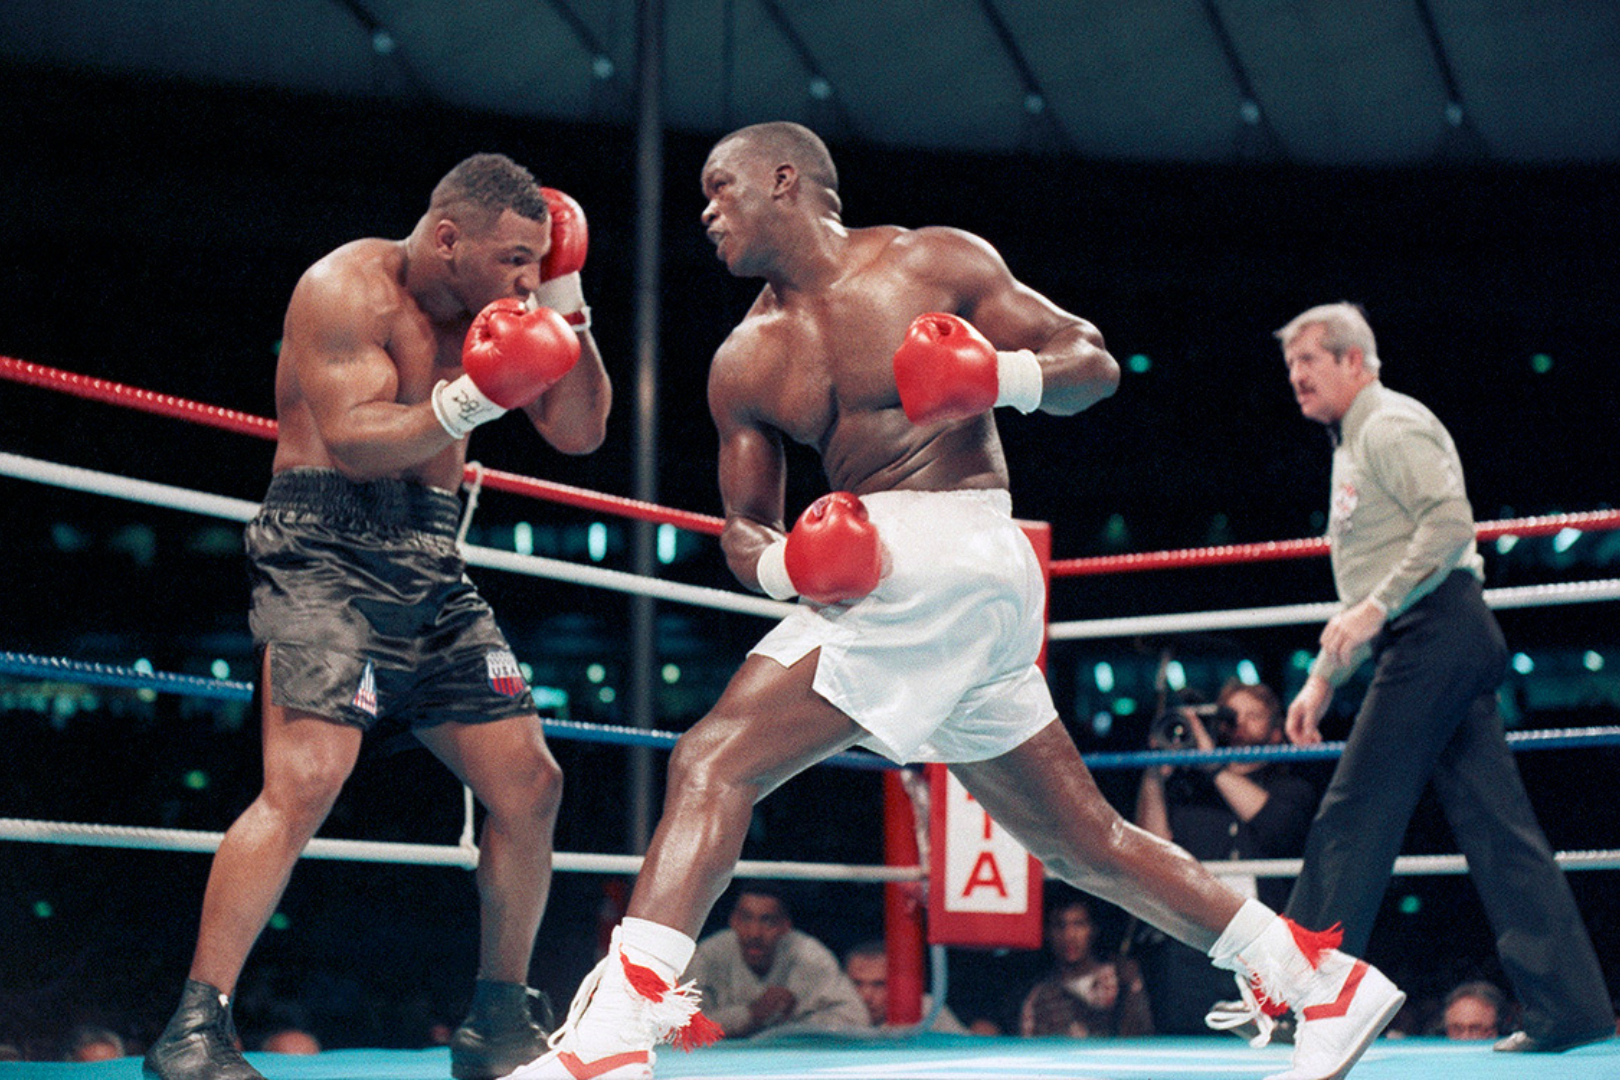 Top 10 Underdog Victories in Sports History